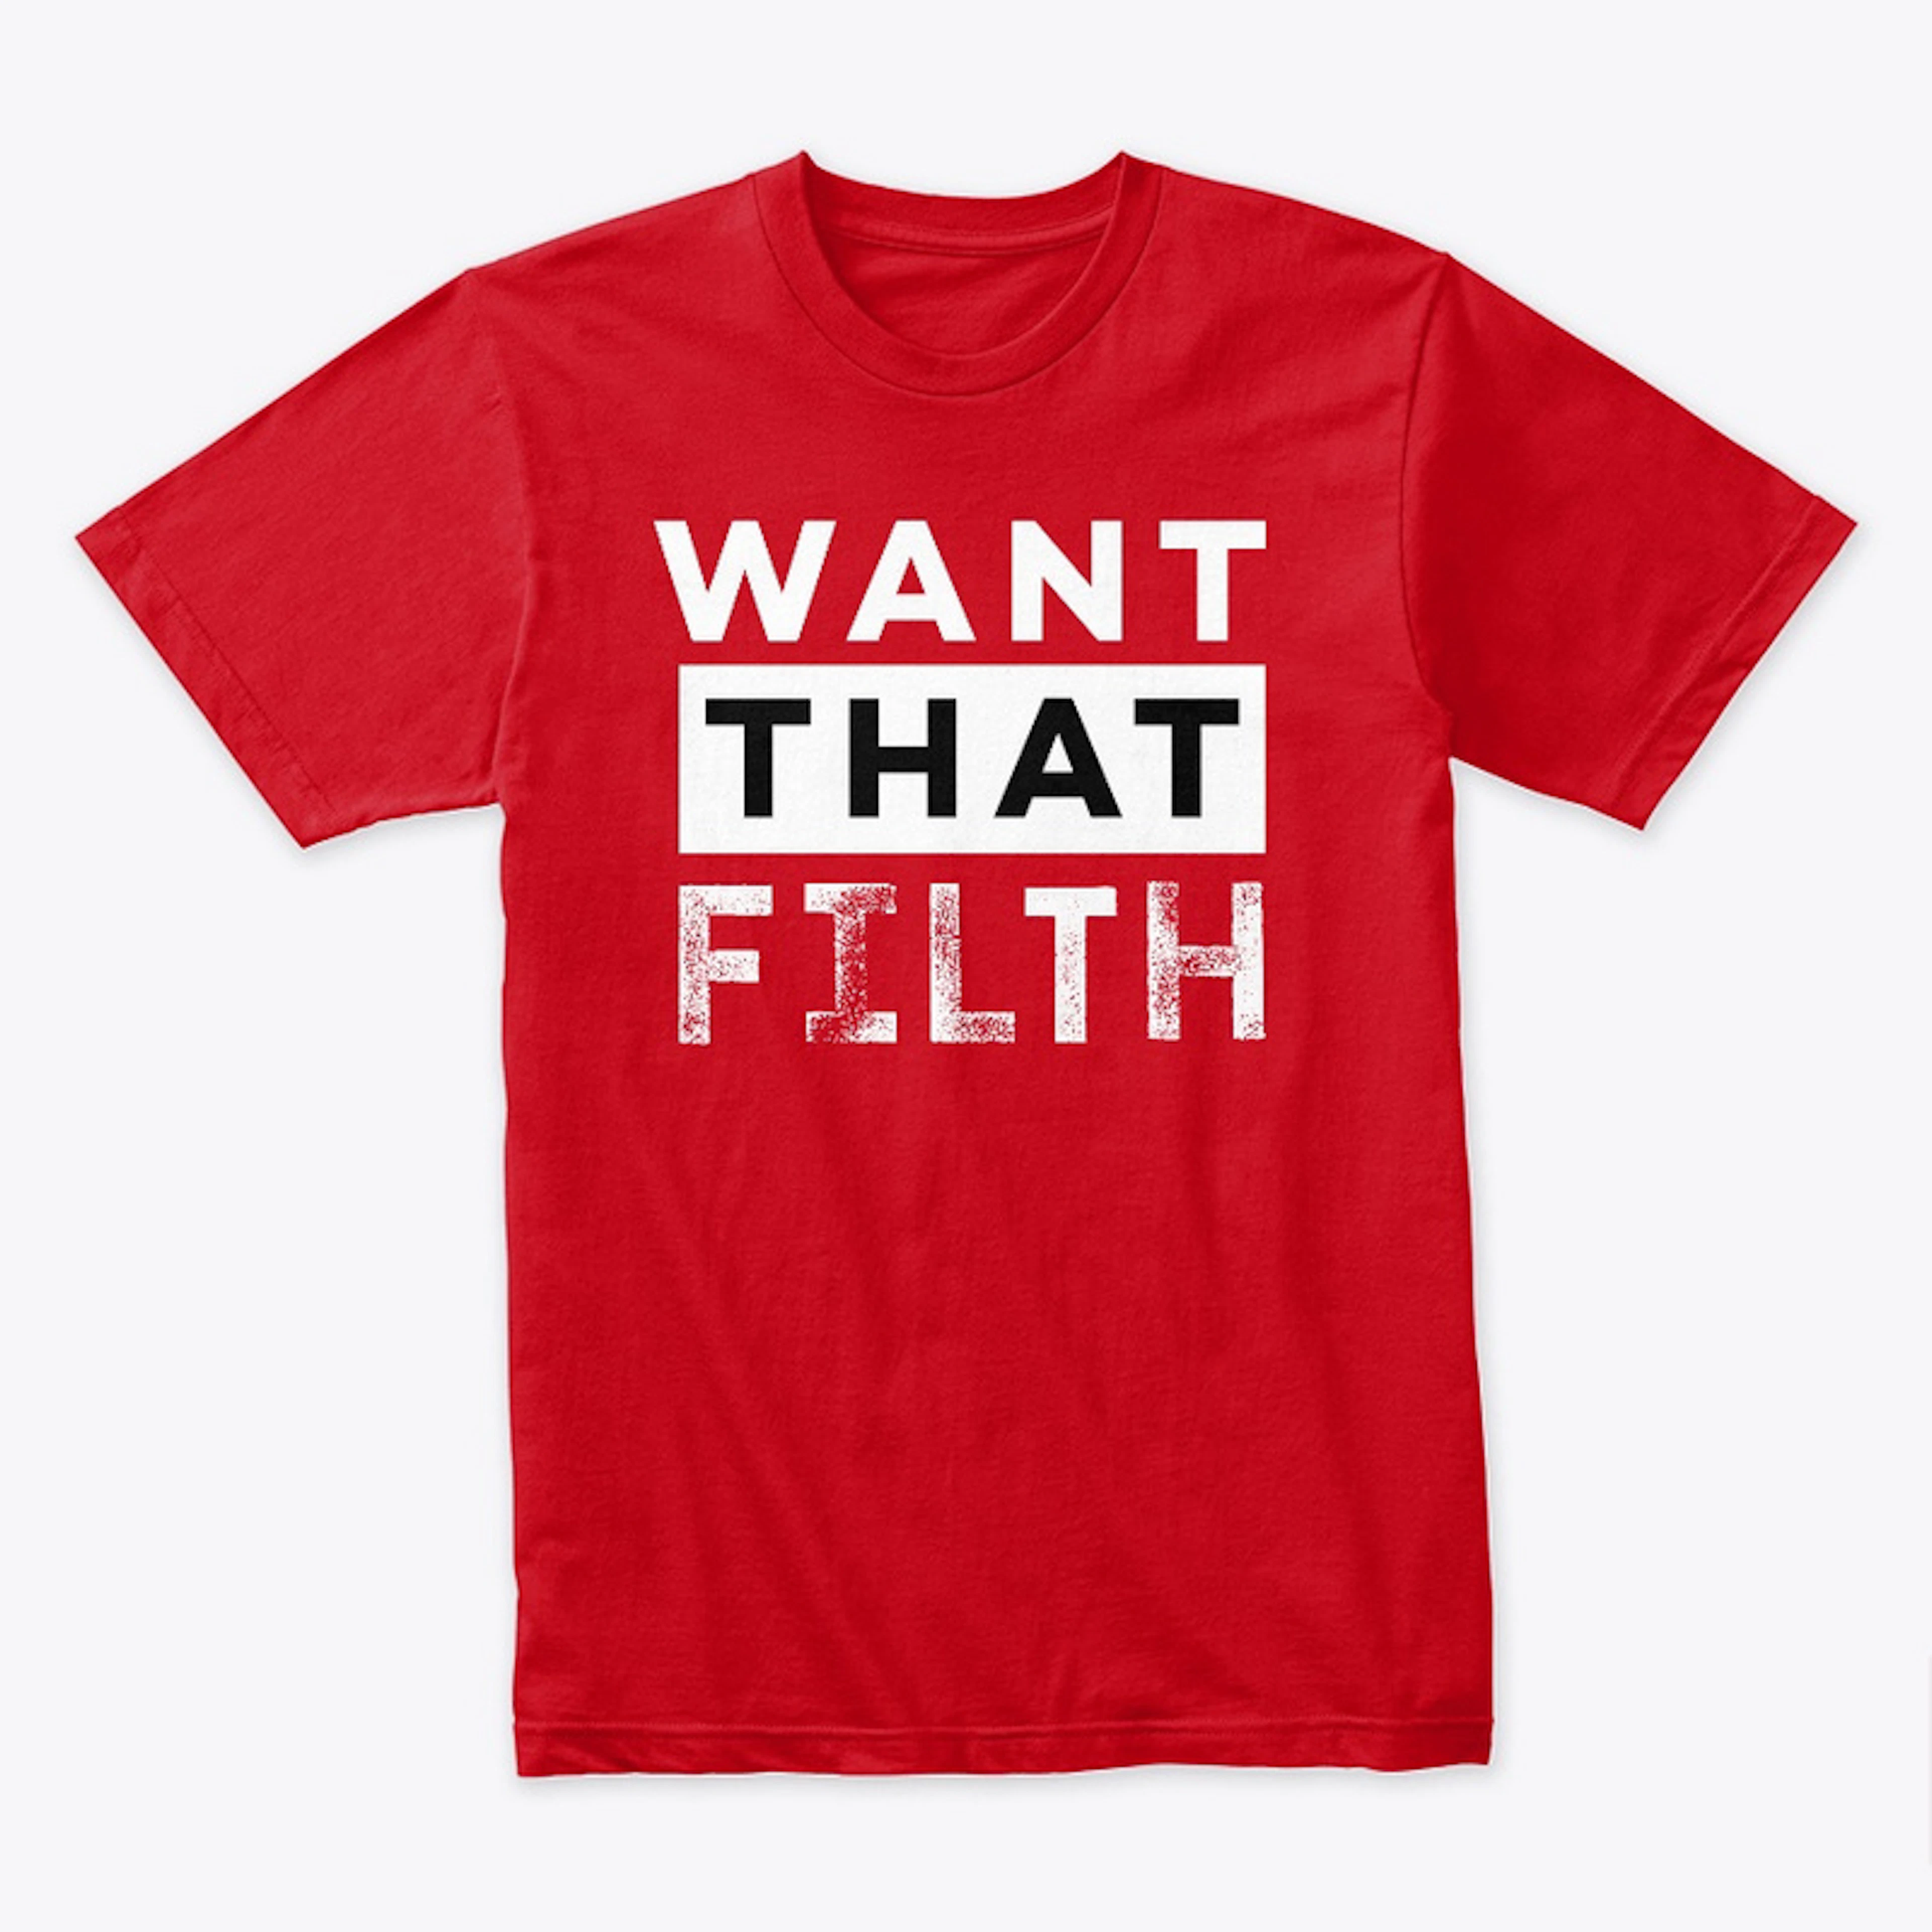 Want That Filth (In Color)